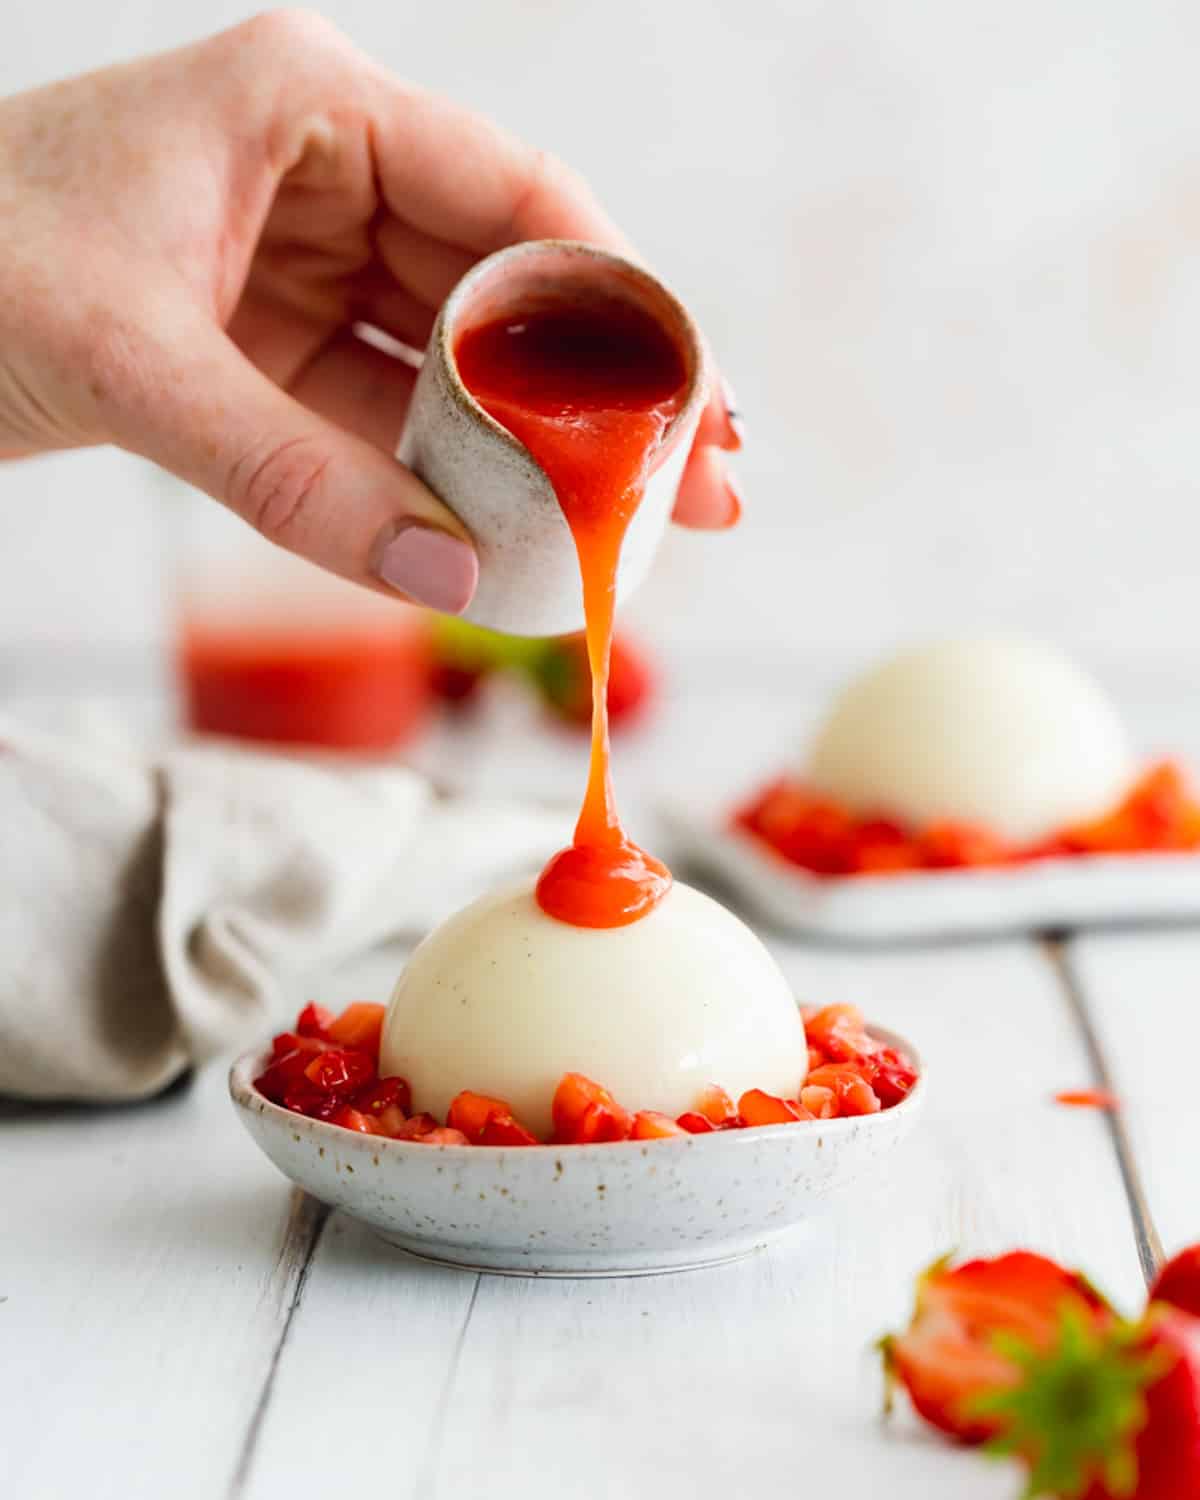 pouring strawberry sauce over dairy free panna cotta.